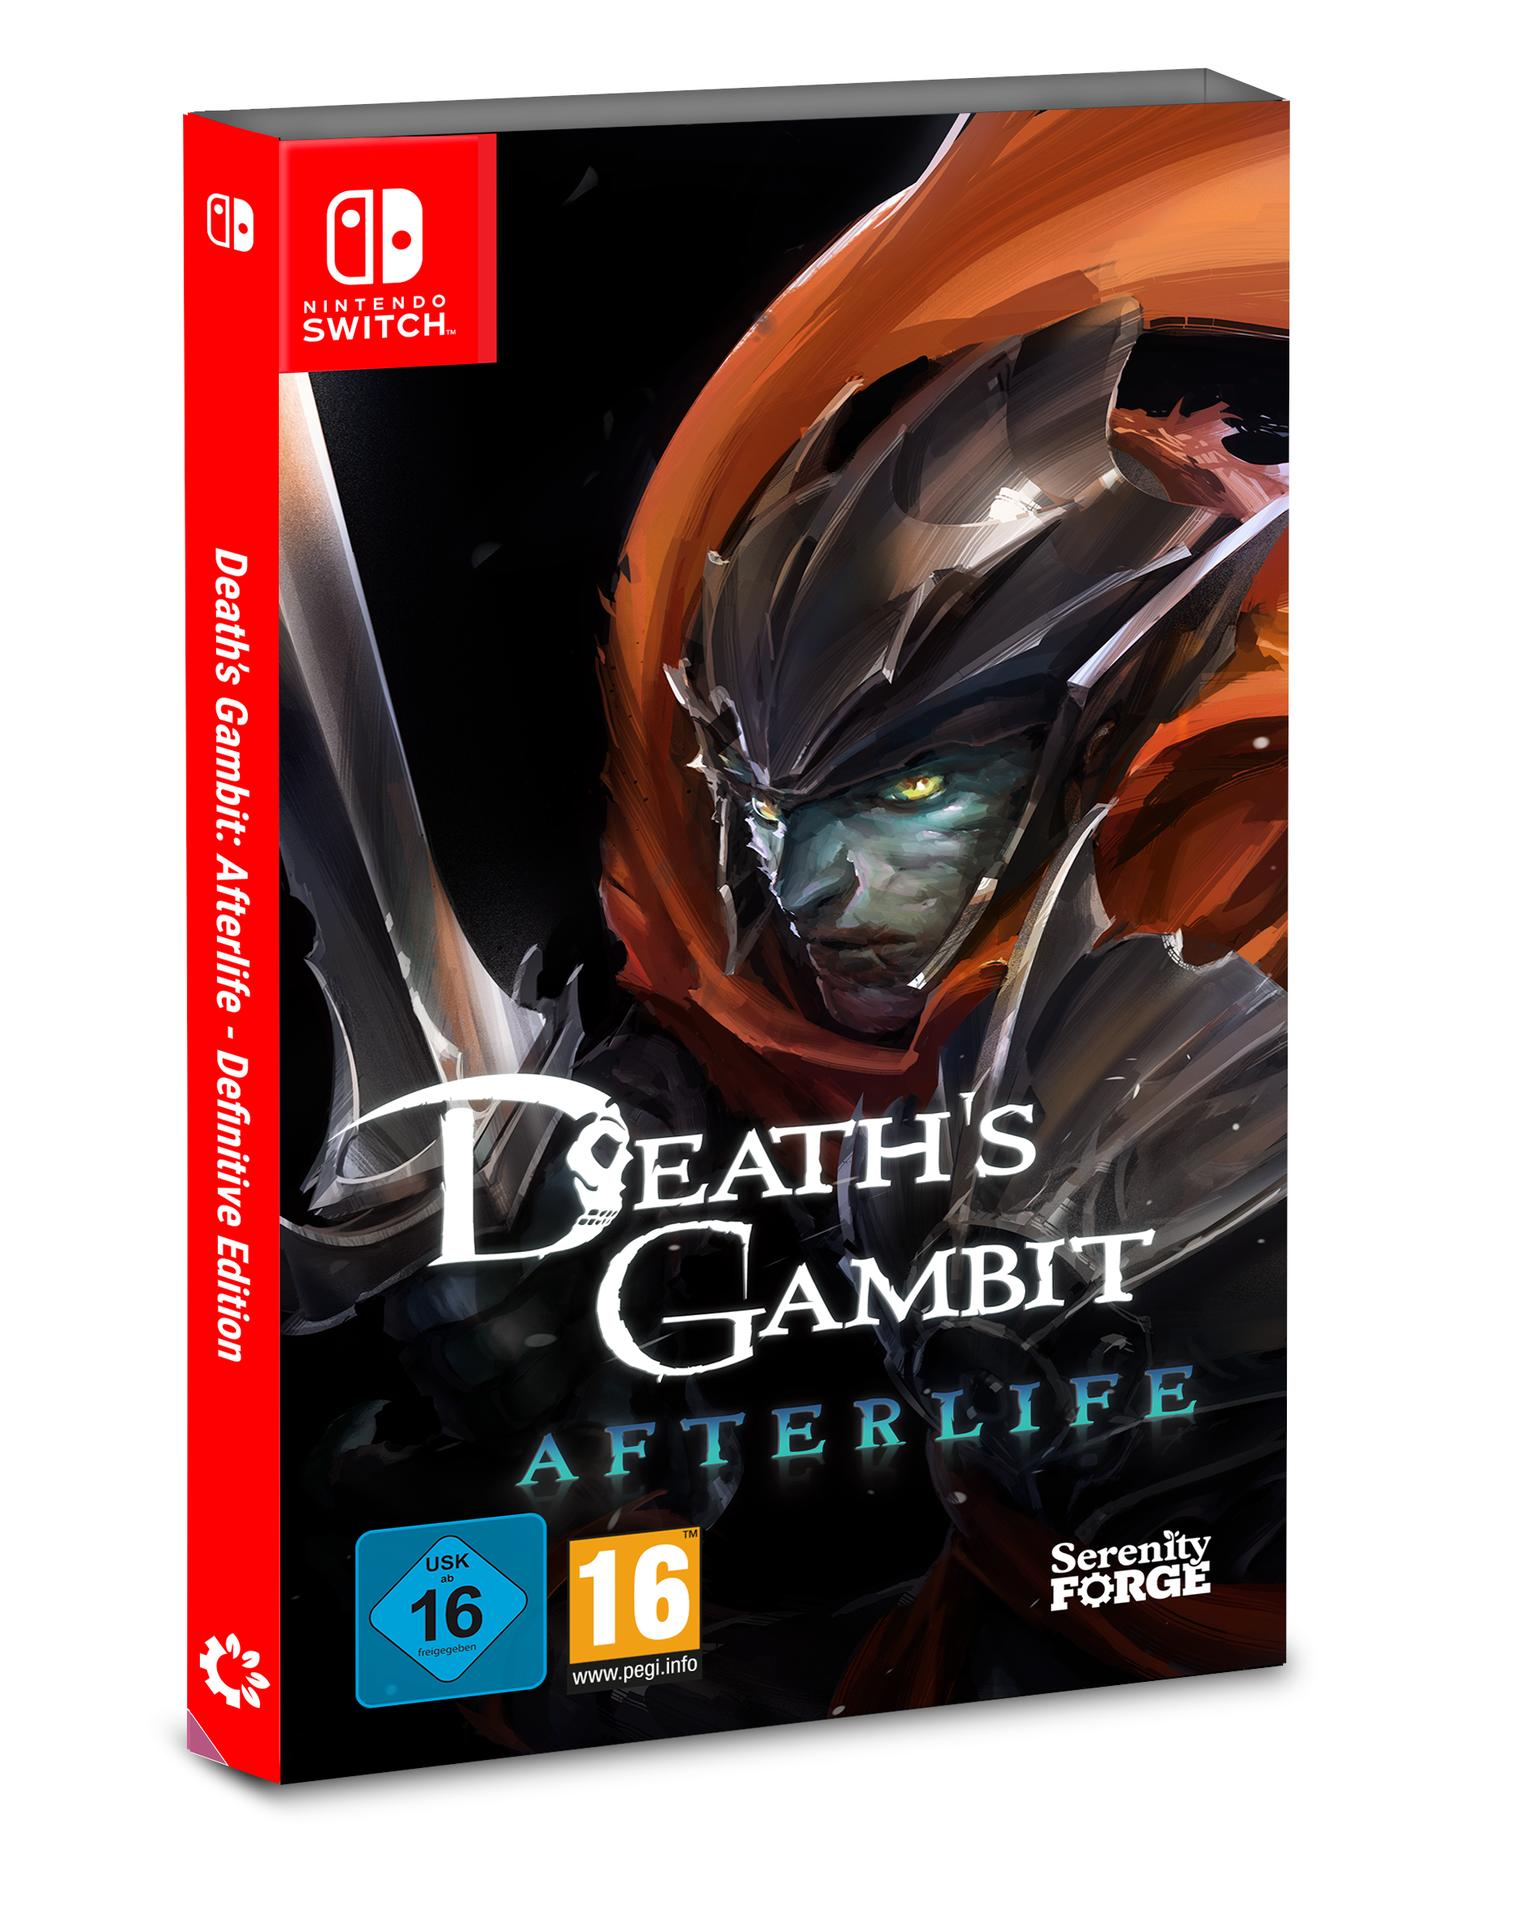 Edition Switch] Afterlife Definitive Death\'s [Nintendo - Gambit -